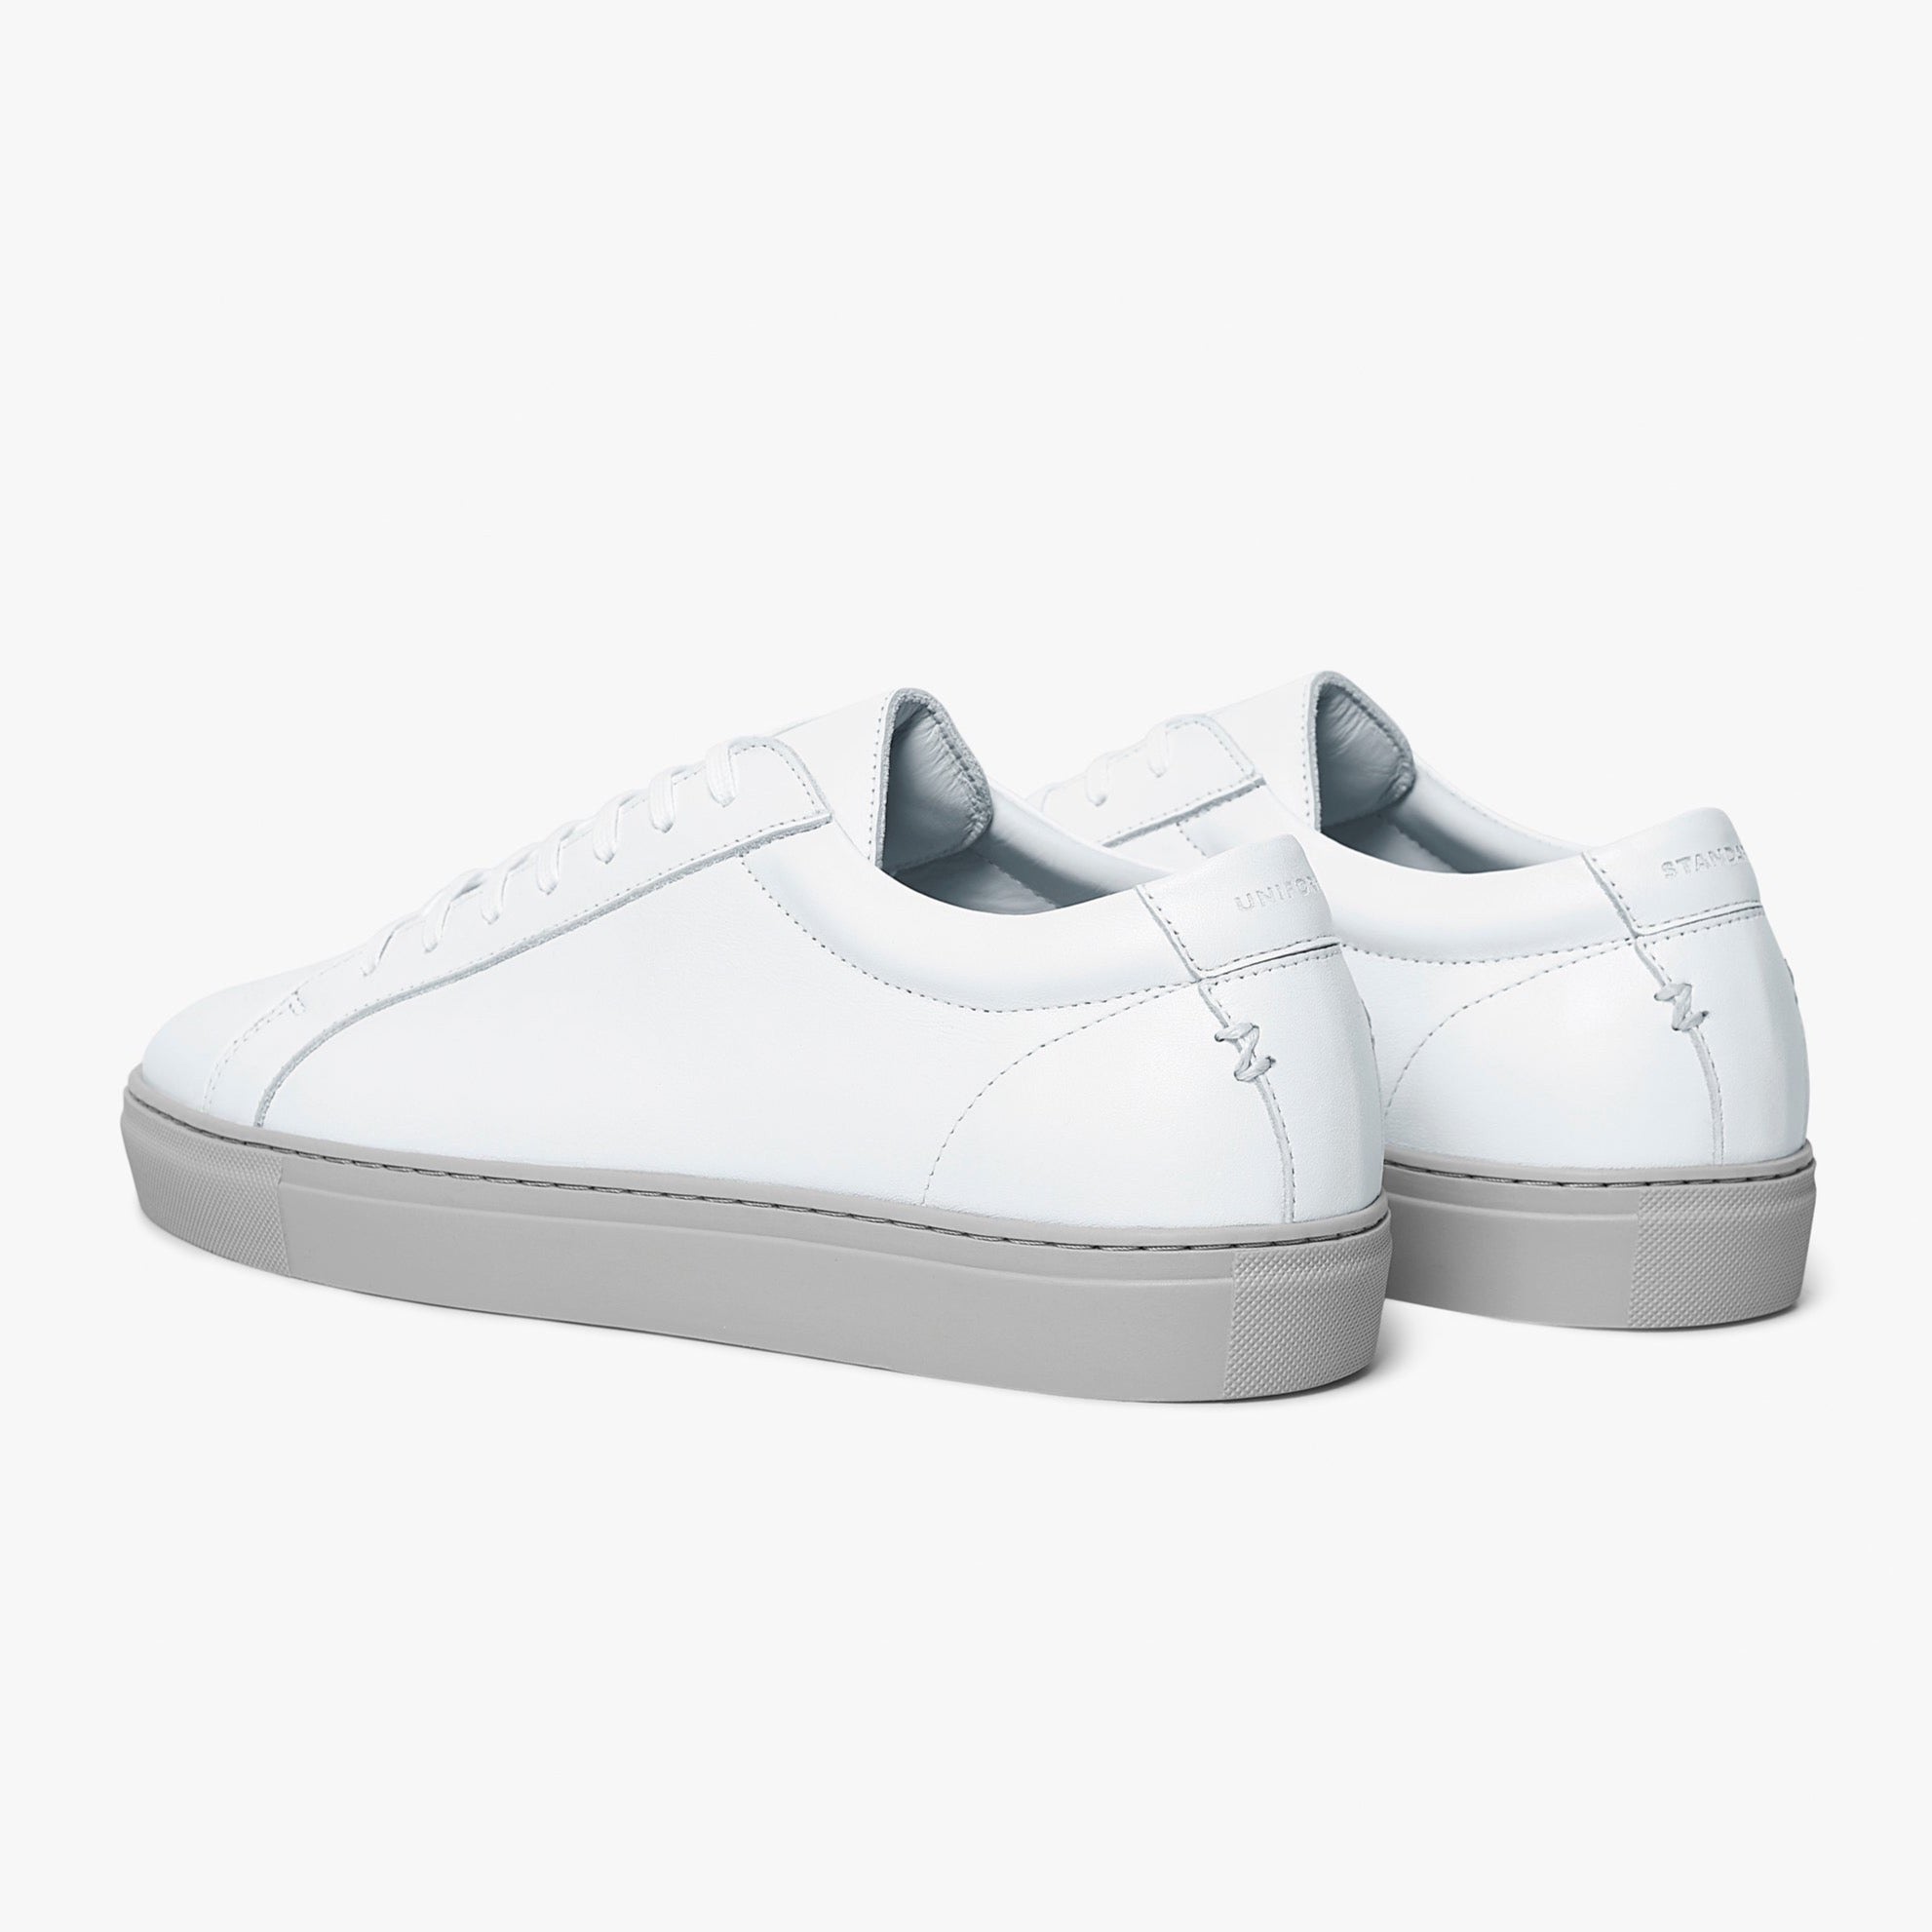 Series 1 White Cement Leather Mens